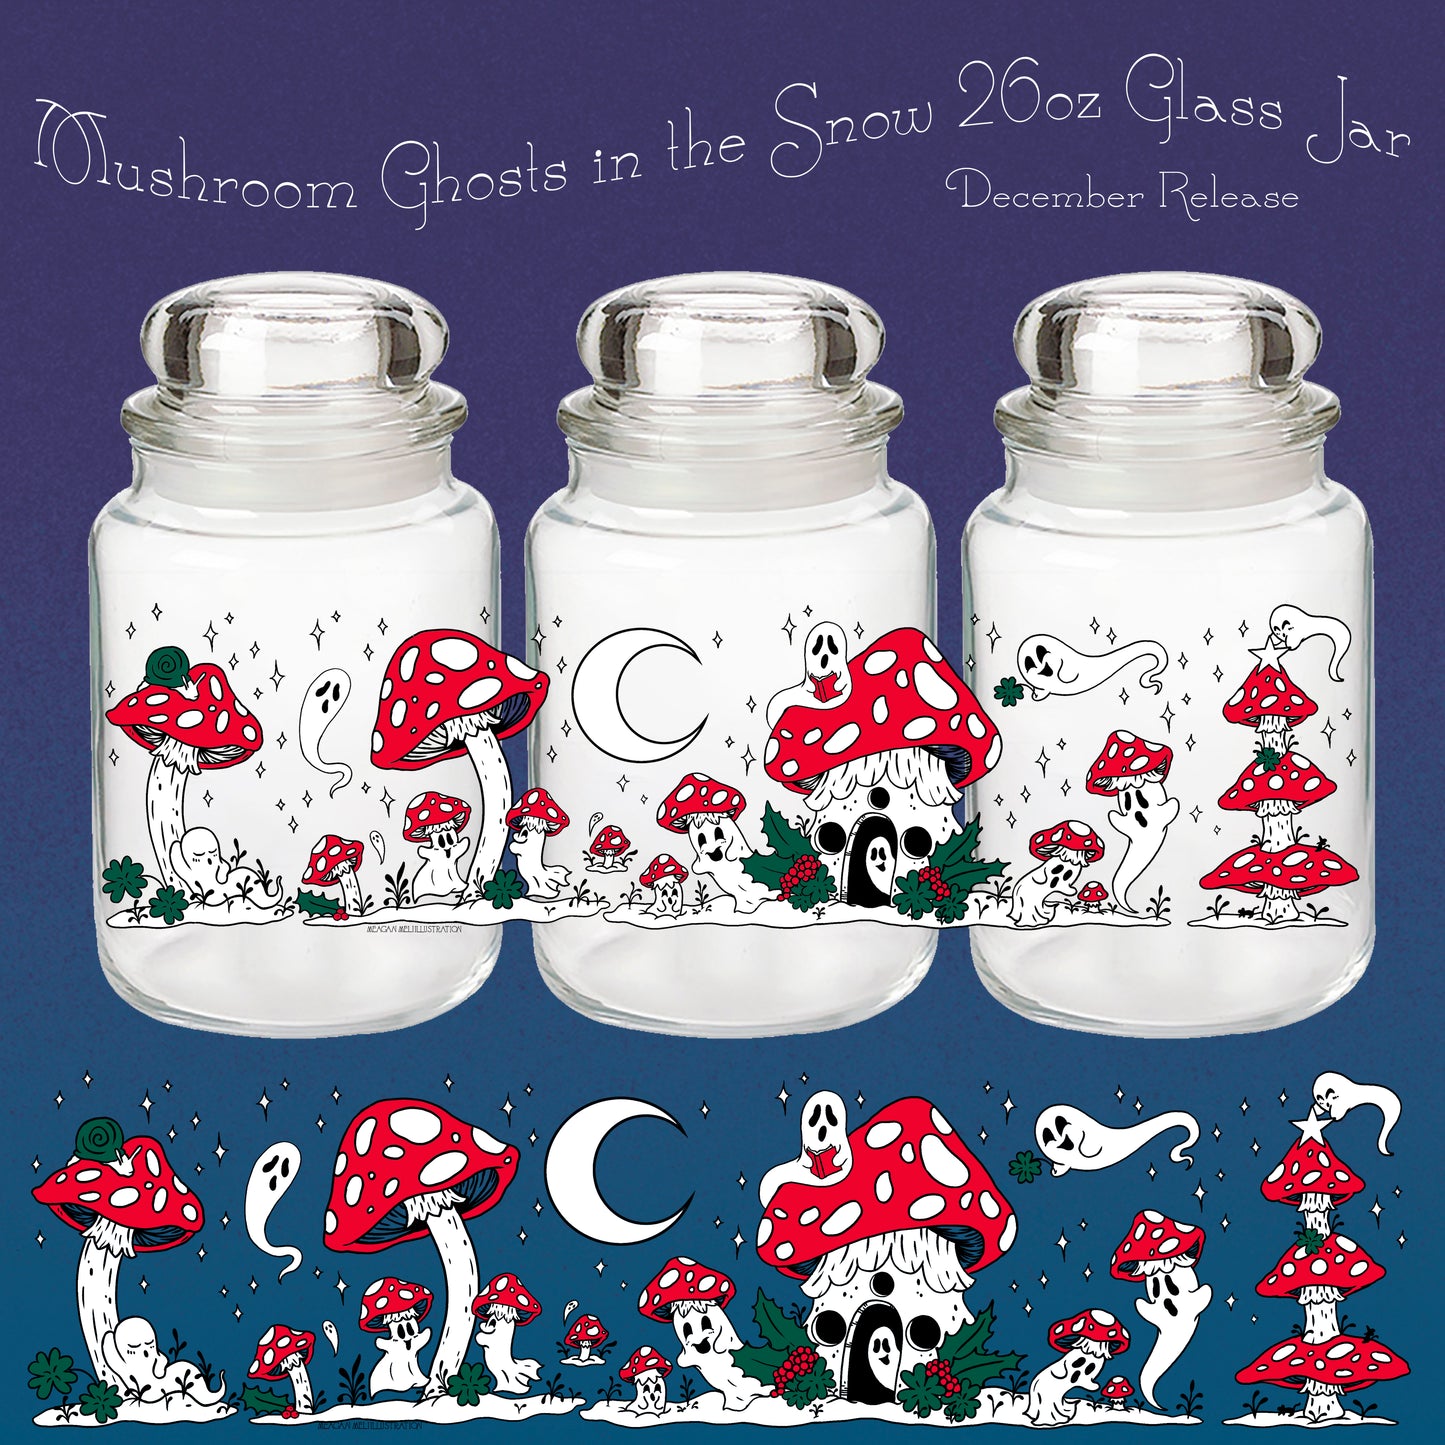 Mushroom Ghosts in the Snow Vintage Inspired Candy Jar